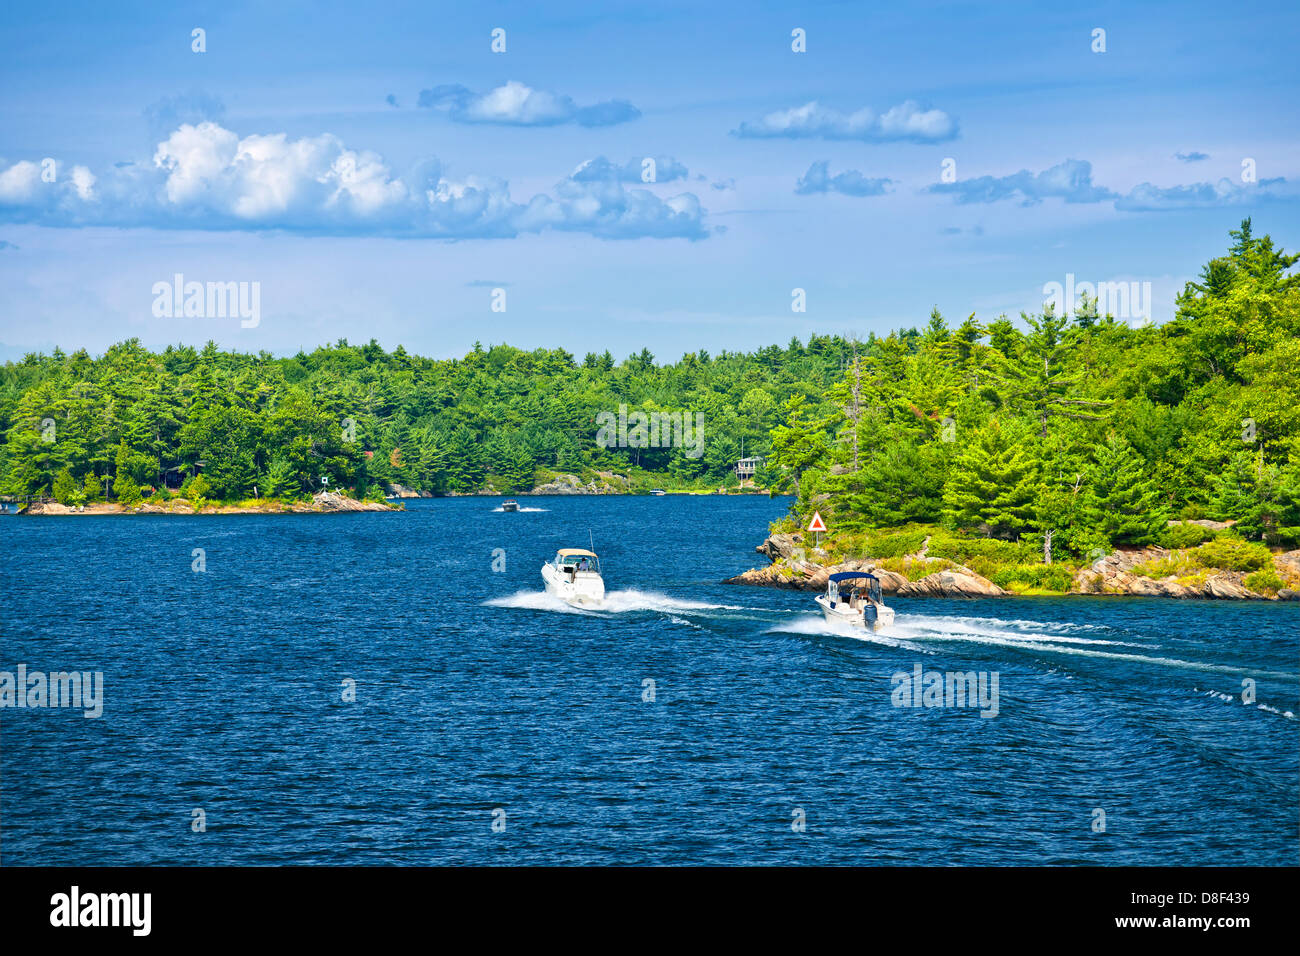 Recreational boats on blue waters of Georgian Bay near Parry Sound, Ontario Canada Stock Photo